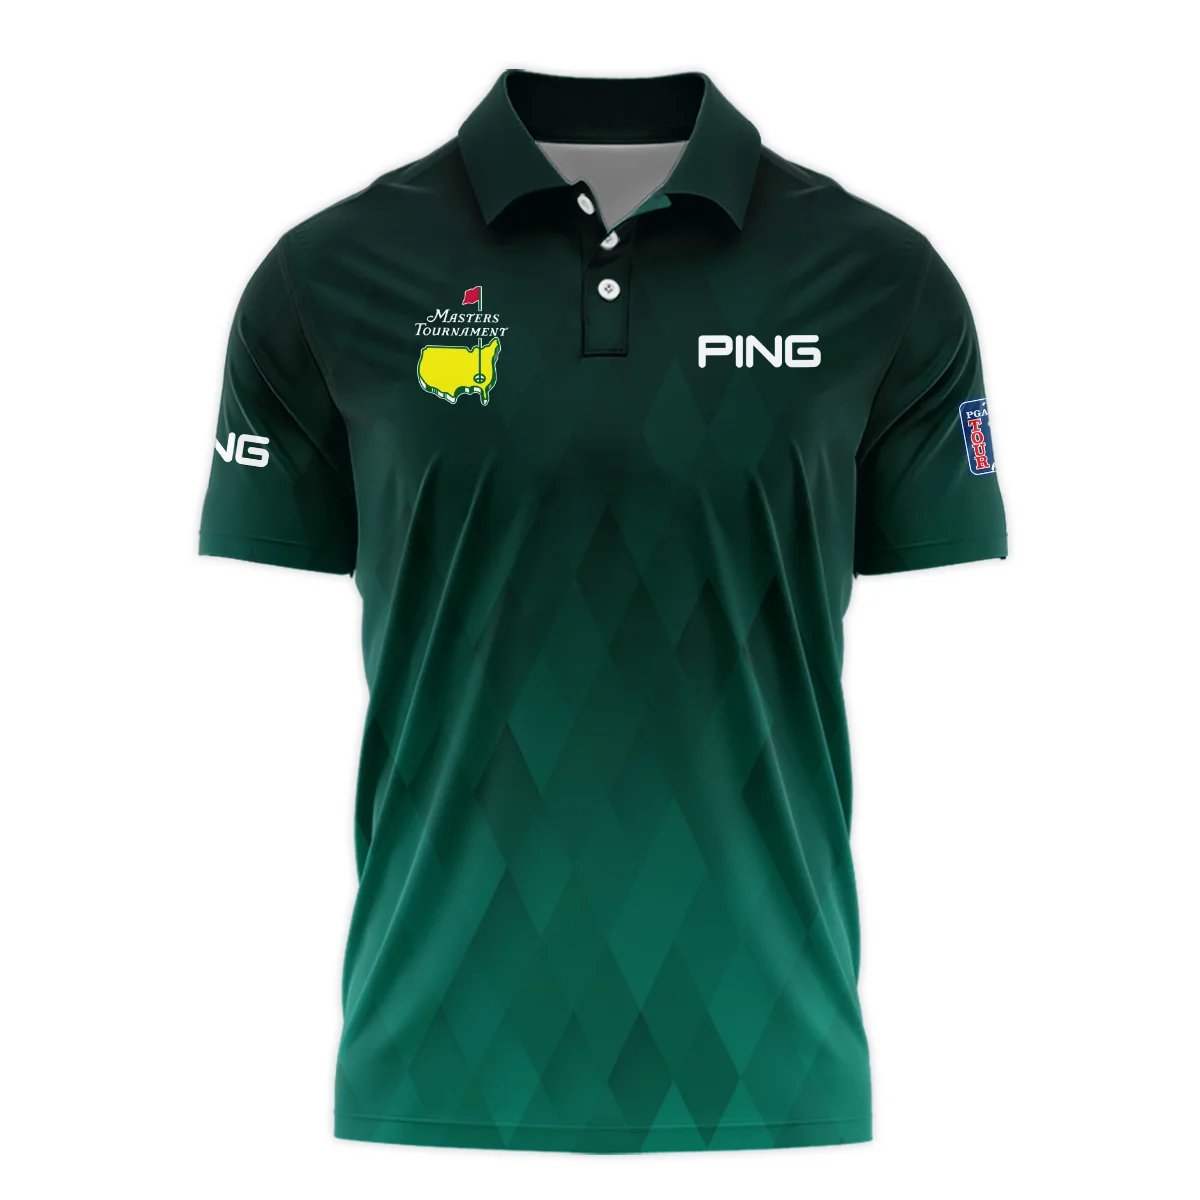 Gradient Dark Green Geometric Pattern Masters Tournament Ping Polo Shirt Style Classic Polo Shirt For Men